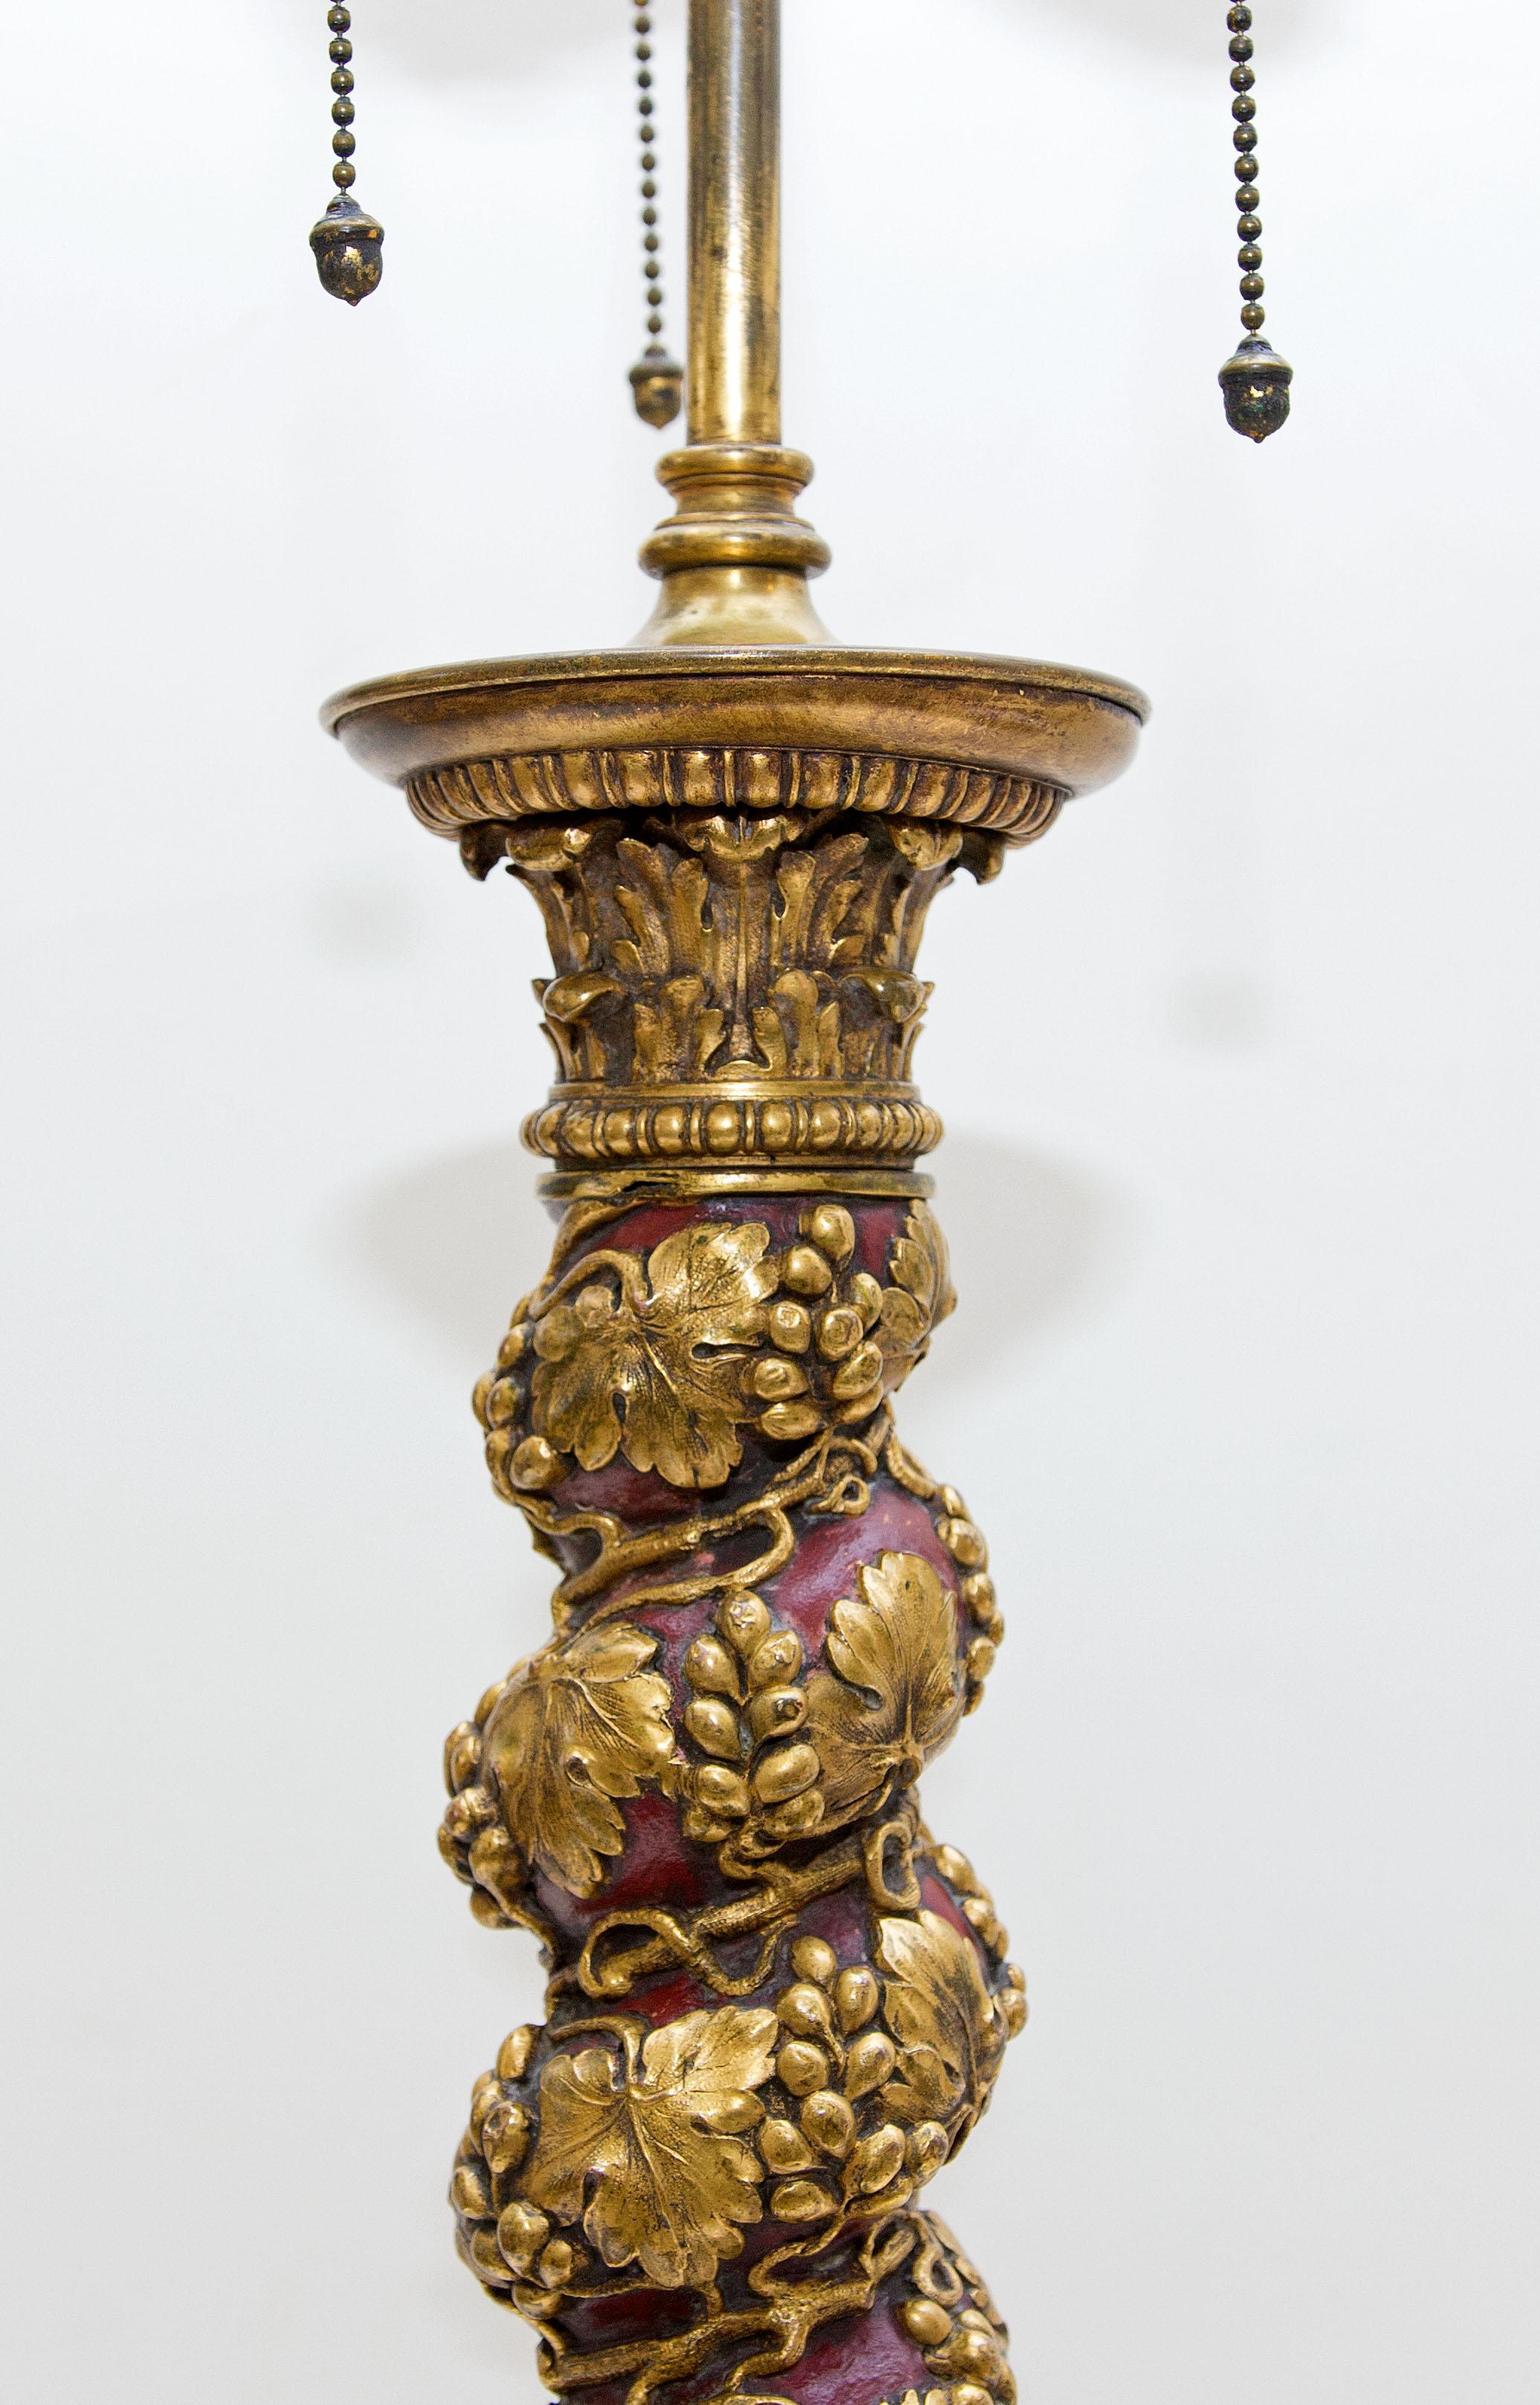 Antique Italian Renaissance style bronze table lamp. Made by E.F. Caldwell. Polished and cold painted bronze. Decorated with grape vines, circa 1910.